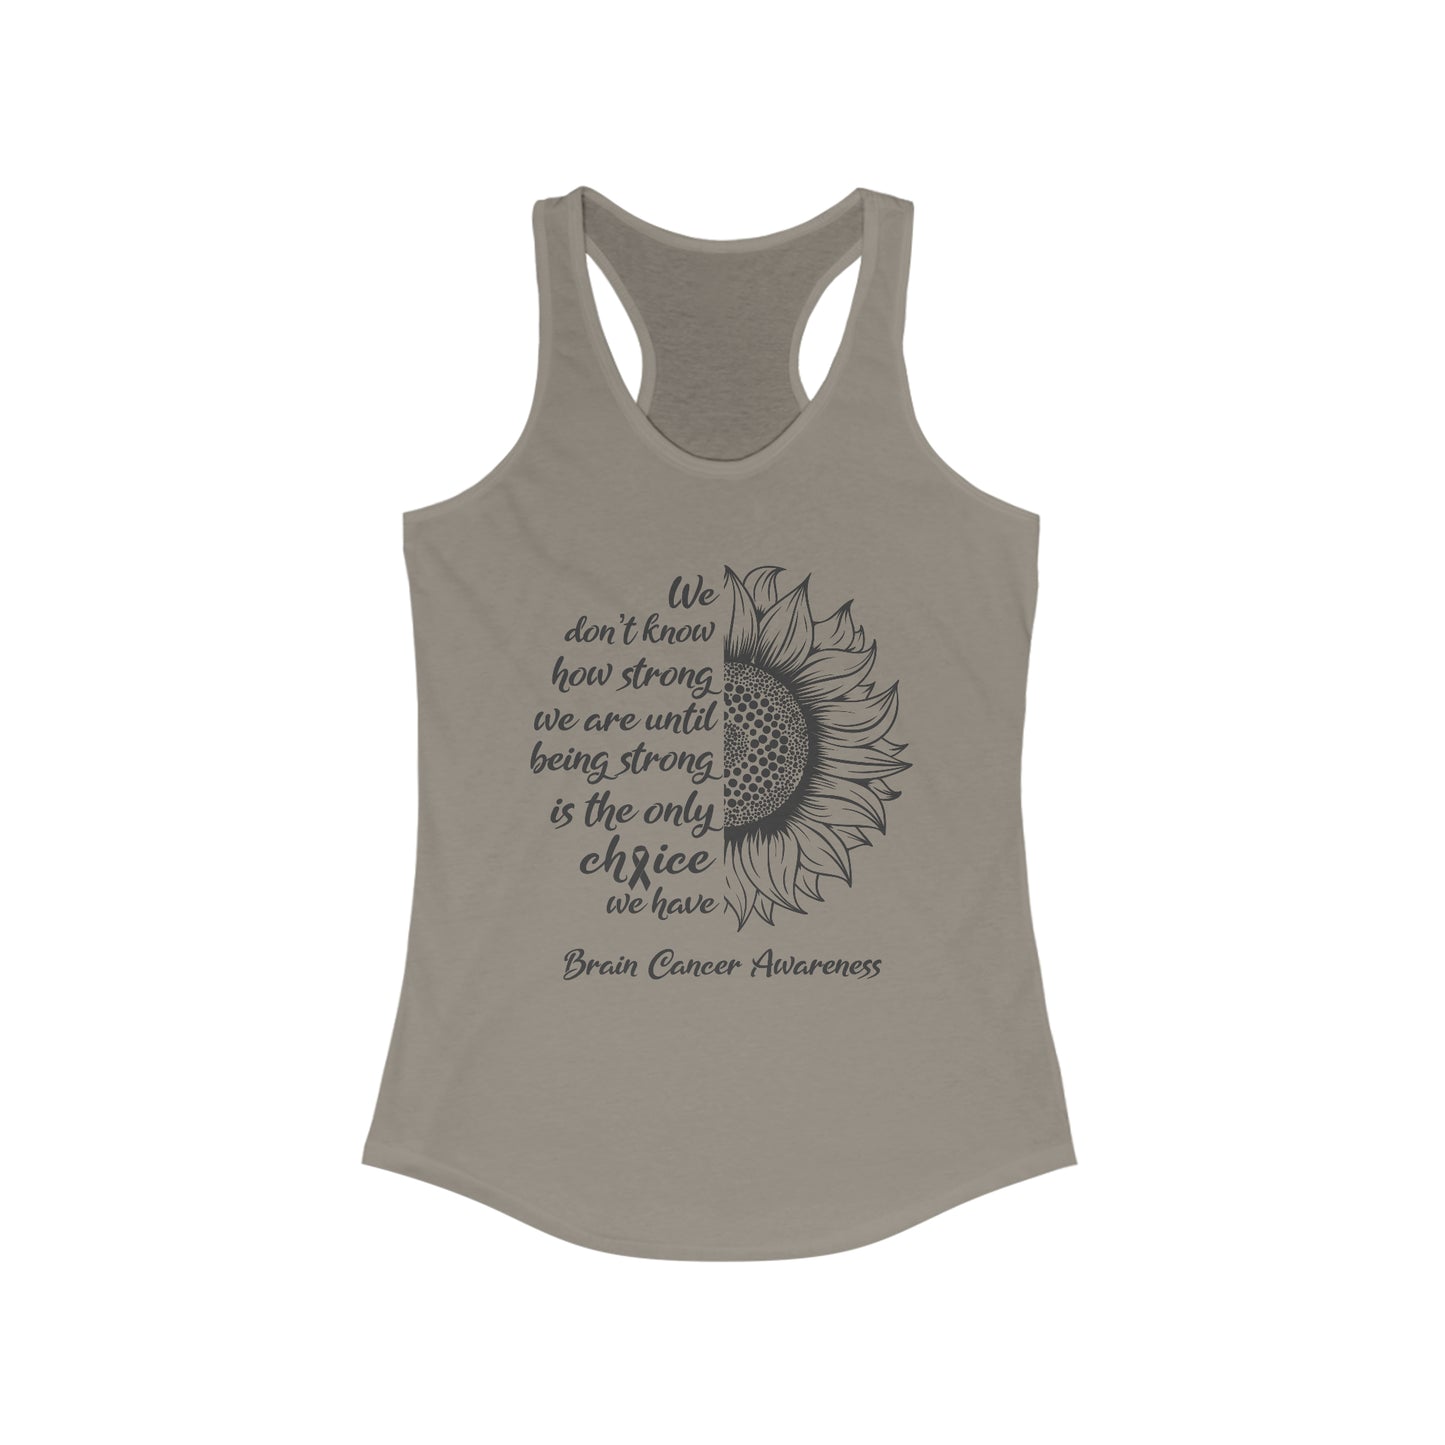 Brain Cancer Awareness Tank Top For Fight Brain Cancer With Sunflower Message